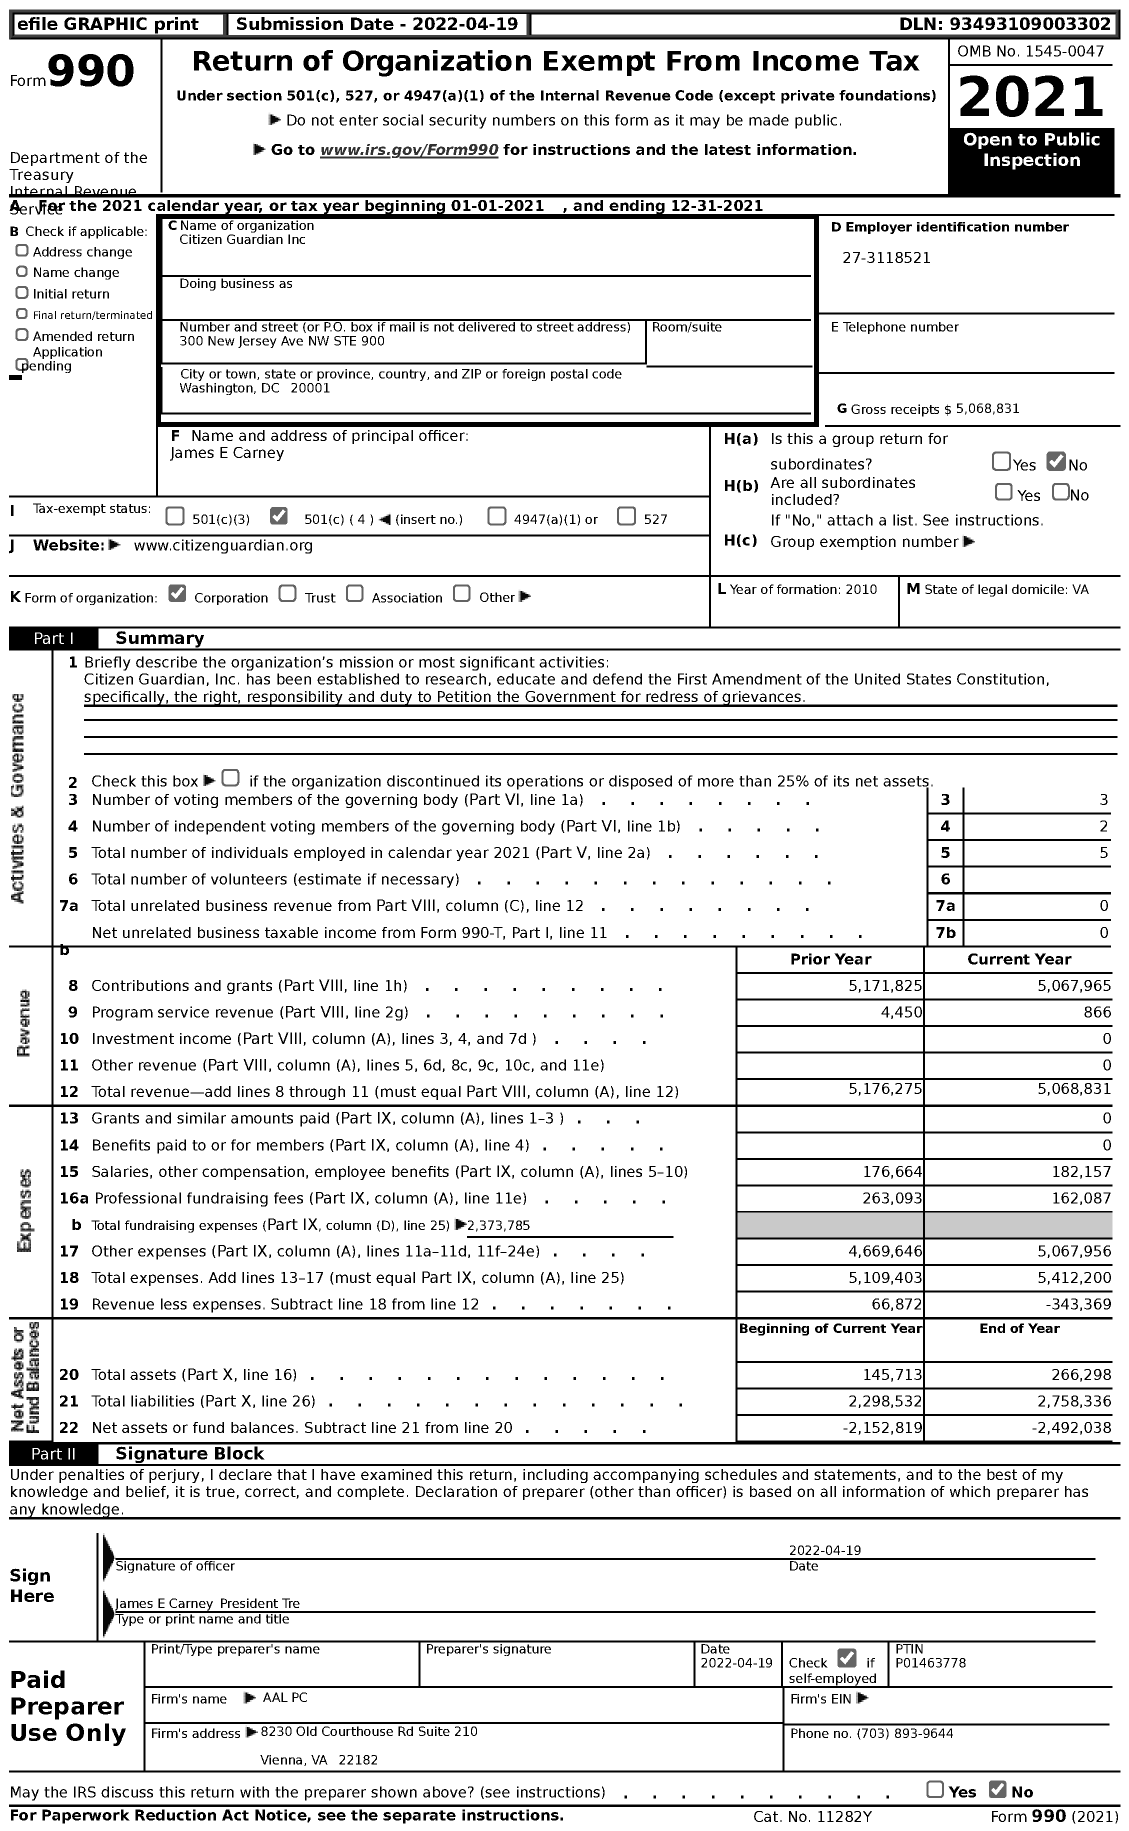 Image of first page of 2021 Form 990 for Citizen Guardian